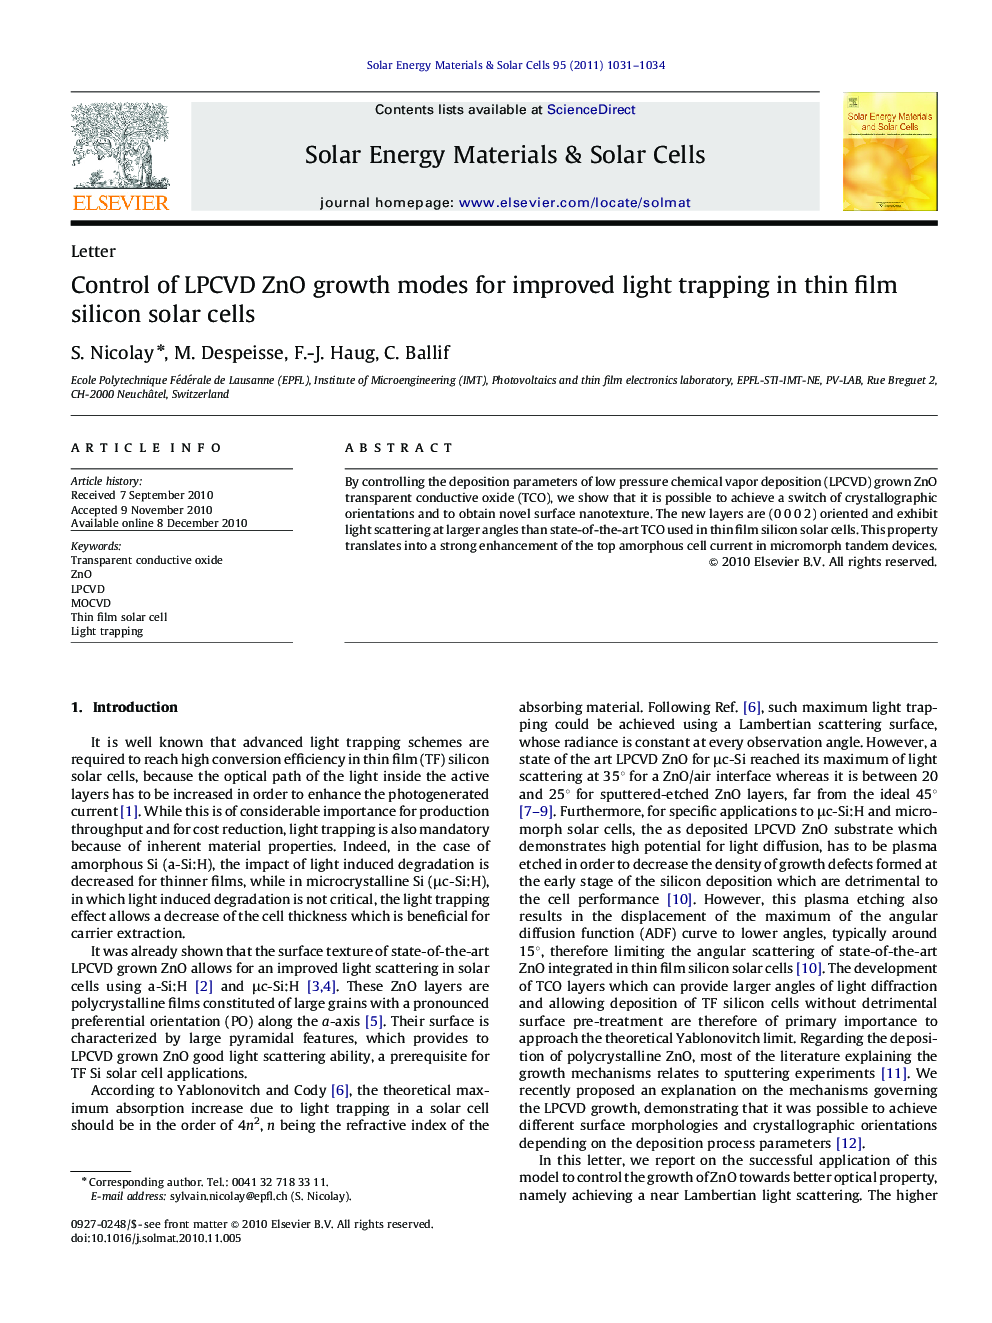 Control of LPCVD ZnO growth modes for improved light trapping in thin film silicon solar cells